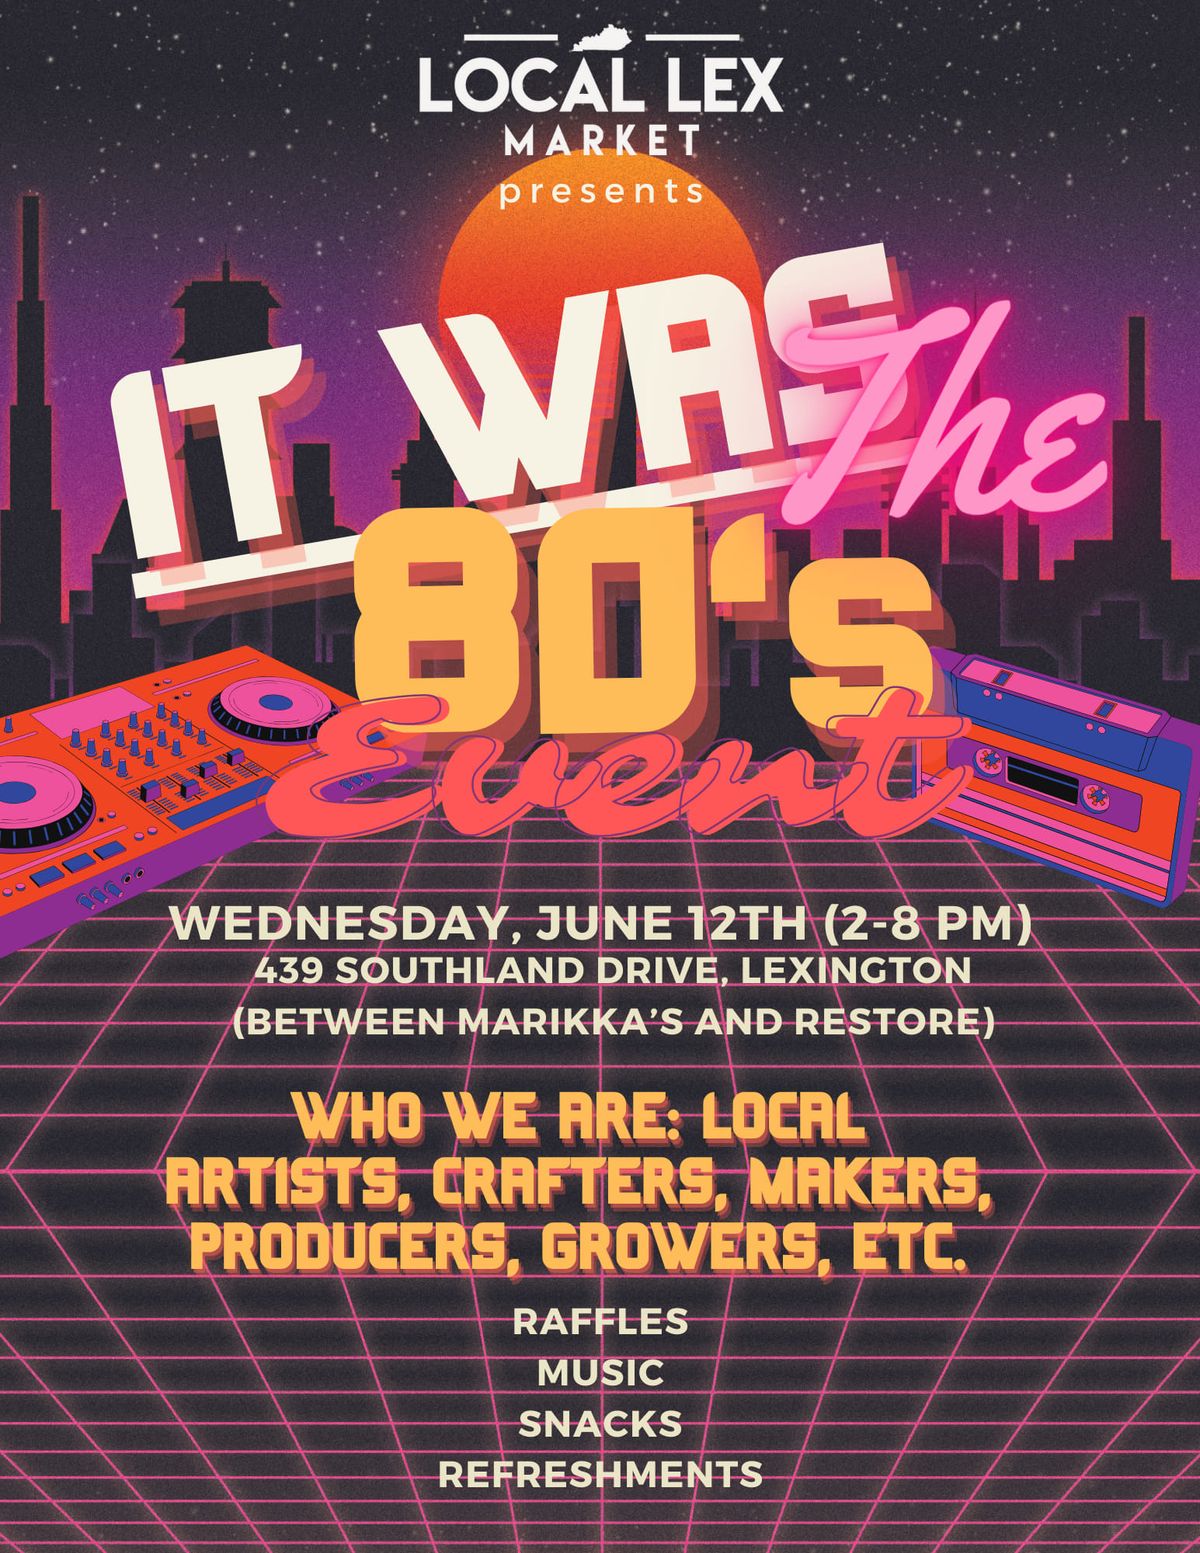 It was the 80's event